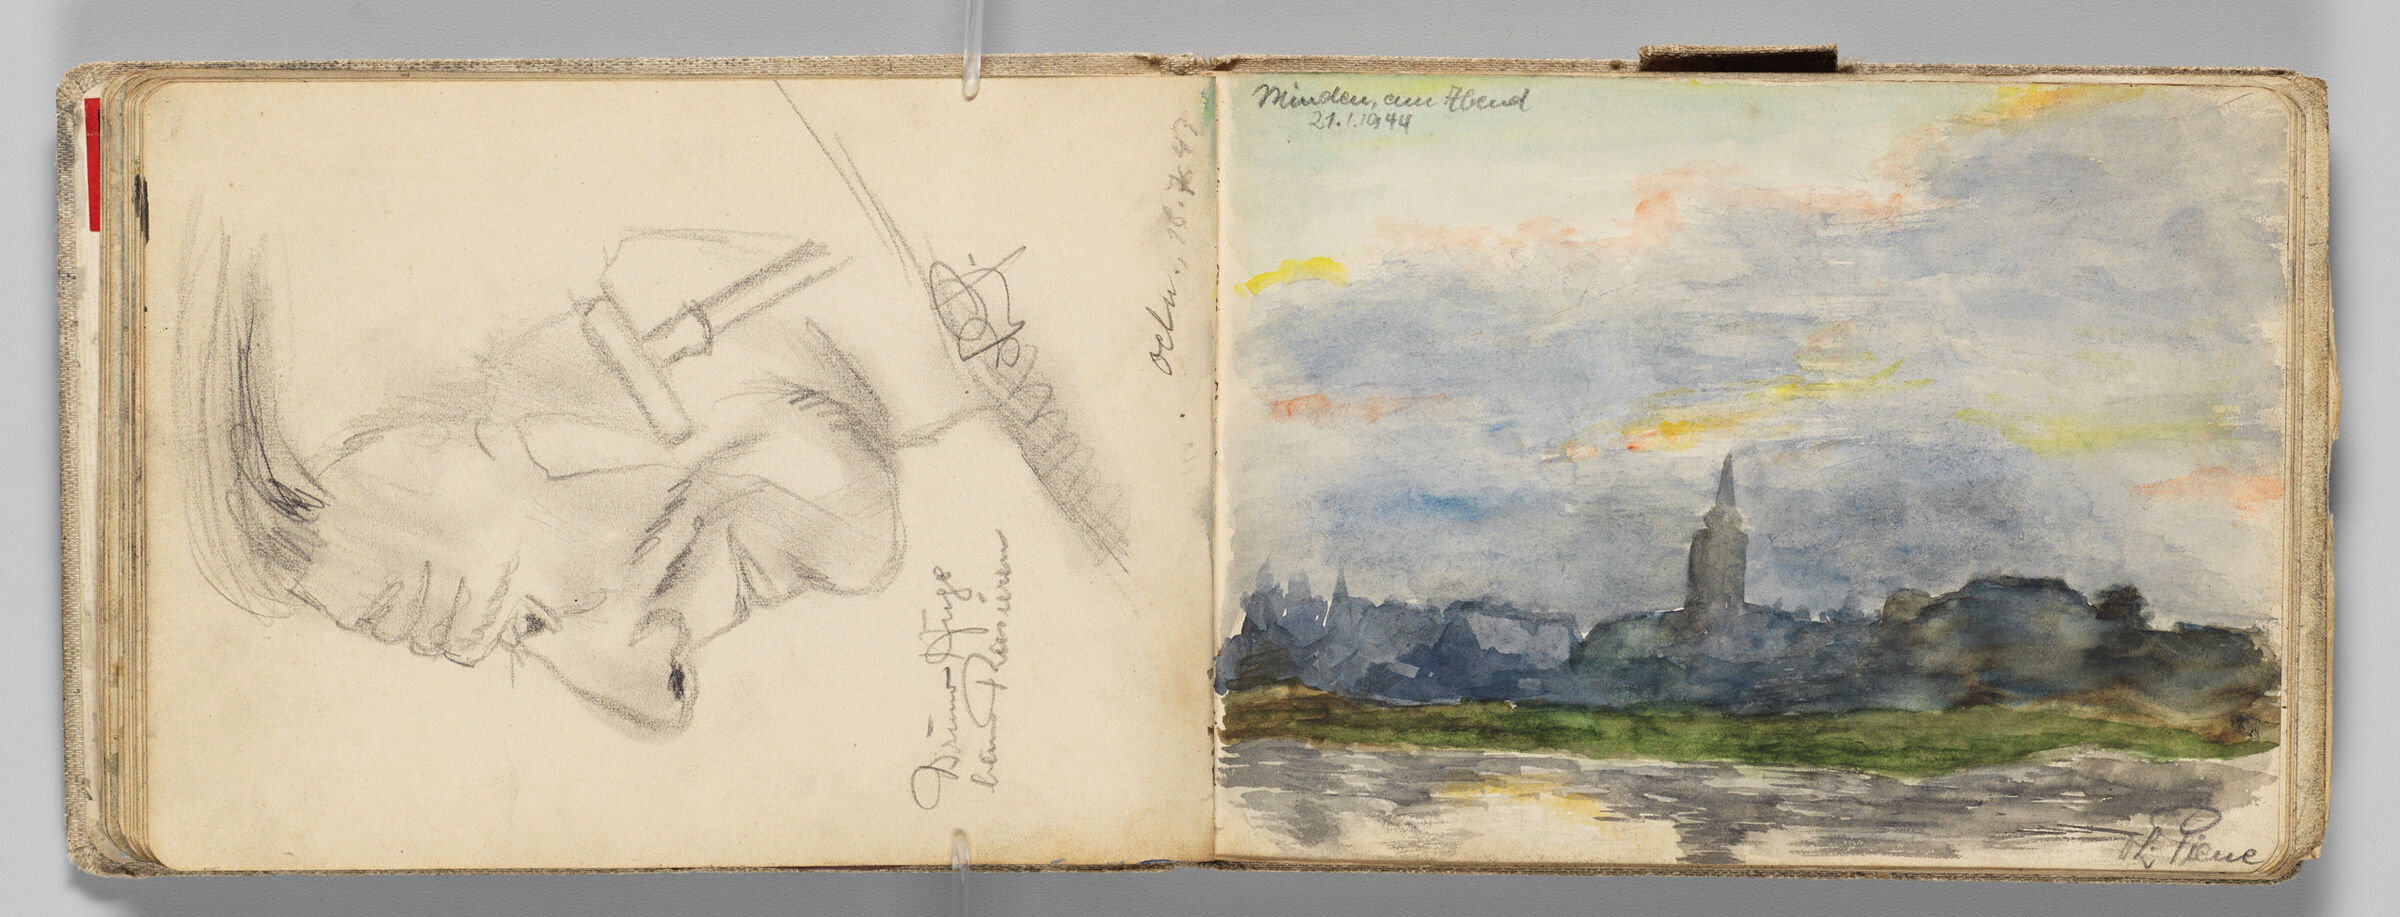 Untitled (Man [Hugo] Shaving, Left Page); Untitled (Minden Landscape In The Evening, Right Page)